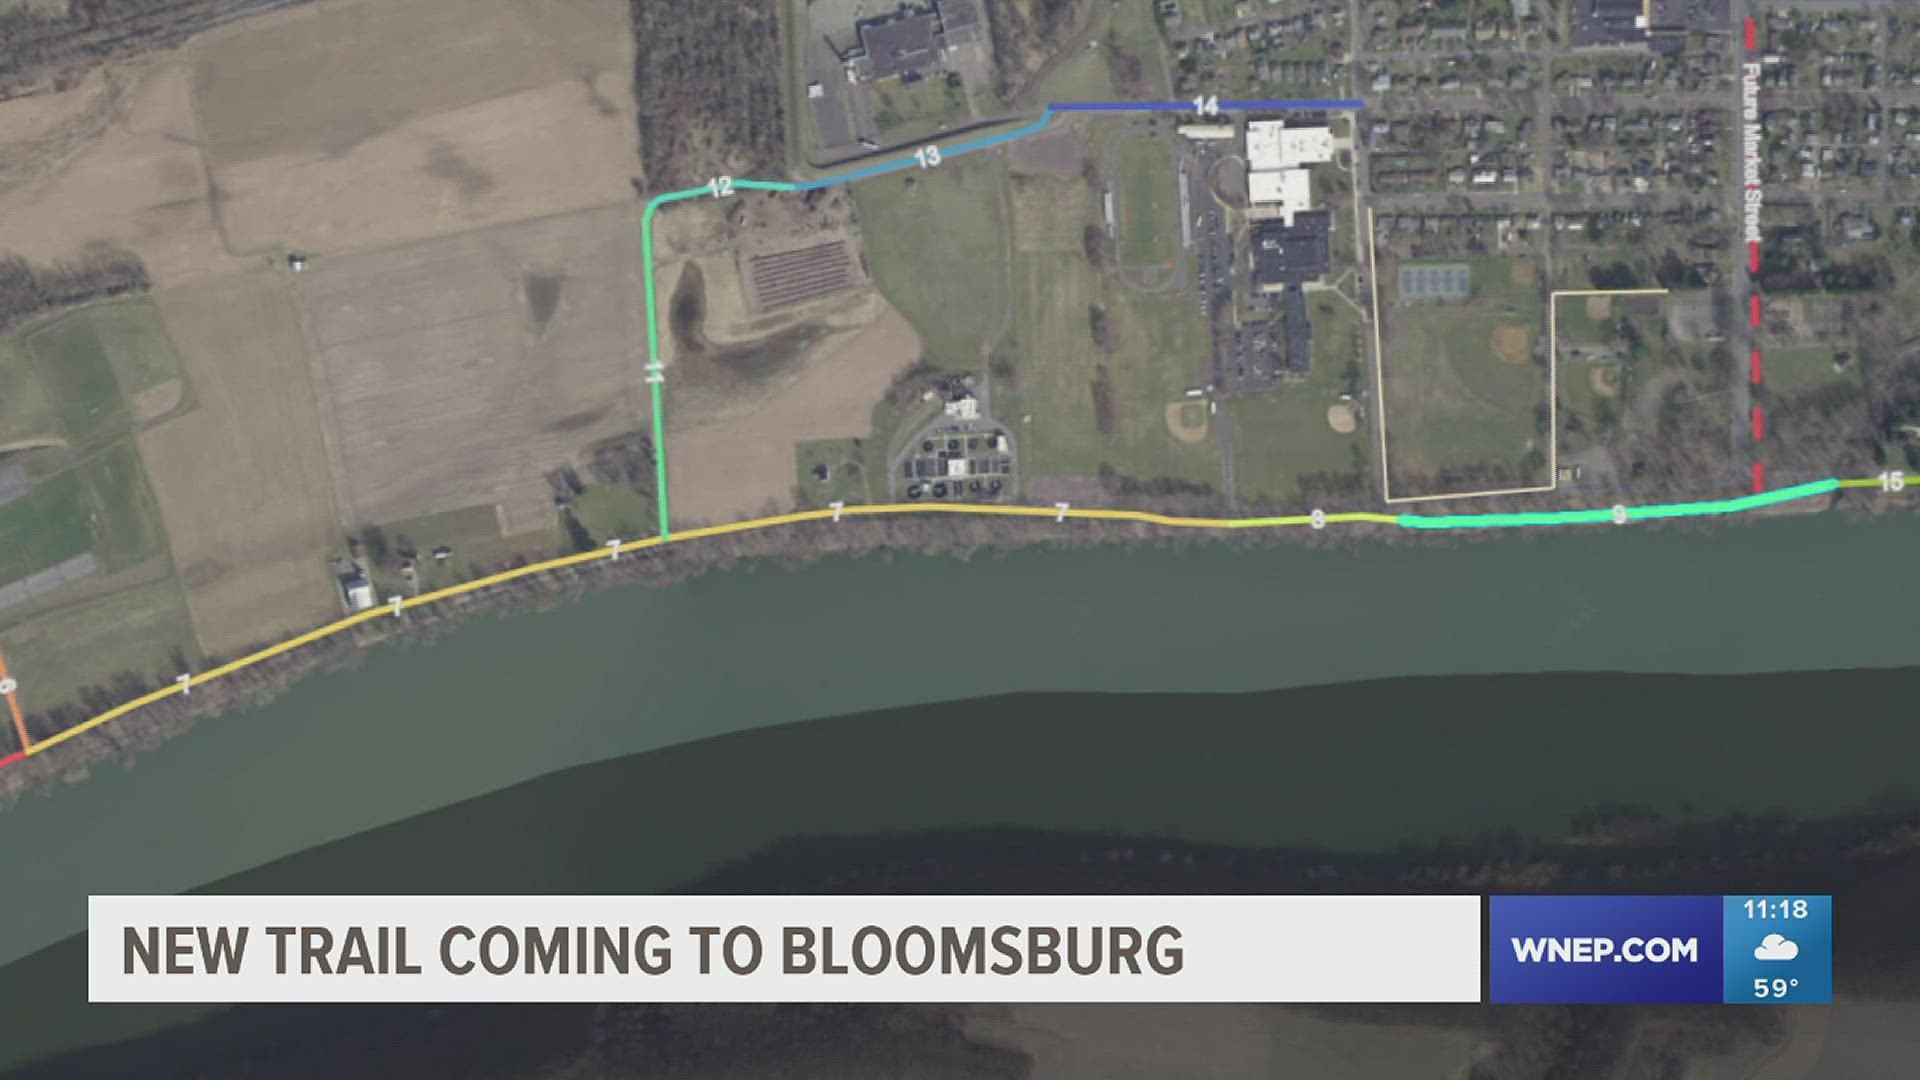 A new river trail is coming to Bloomsburg, but residents have some issues.